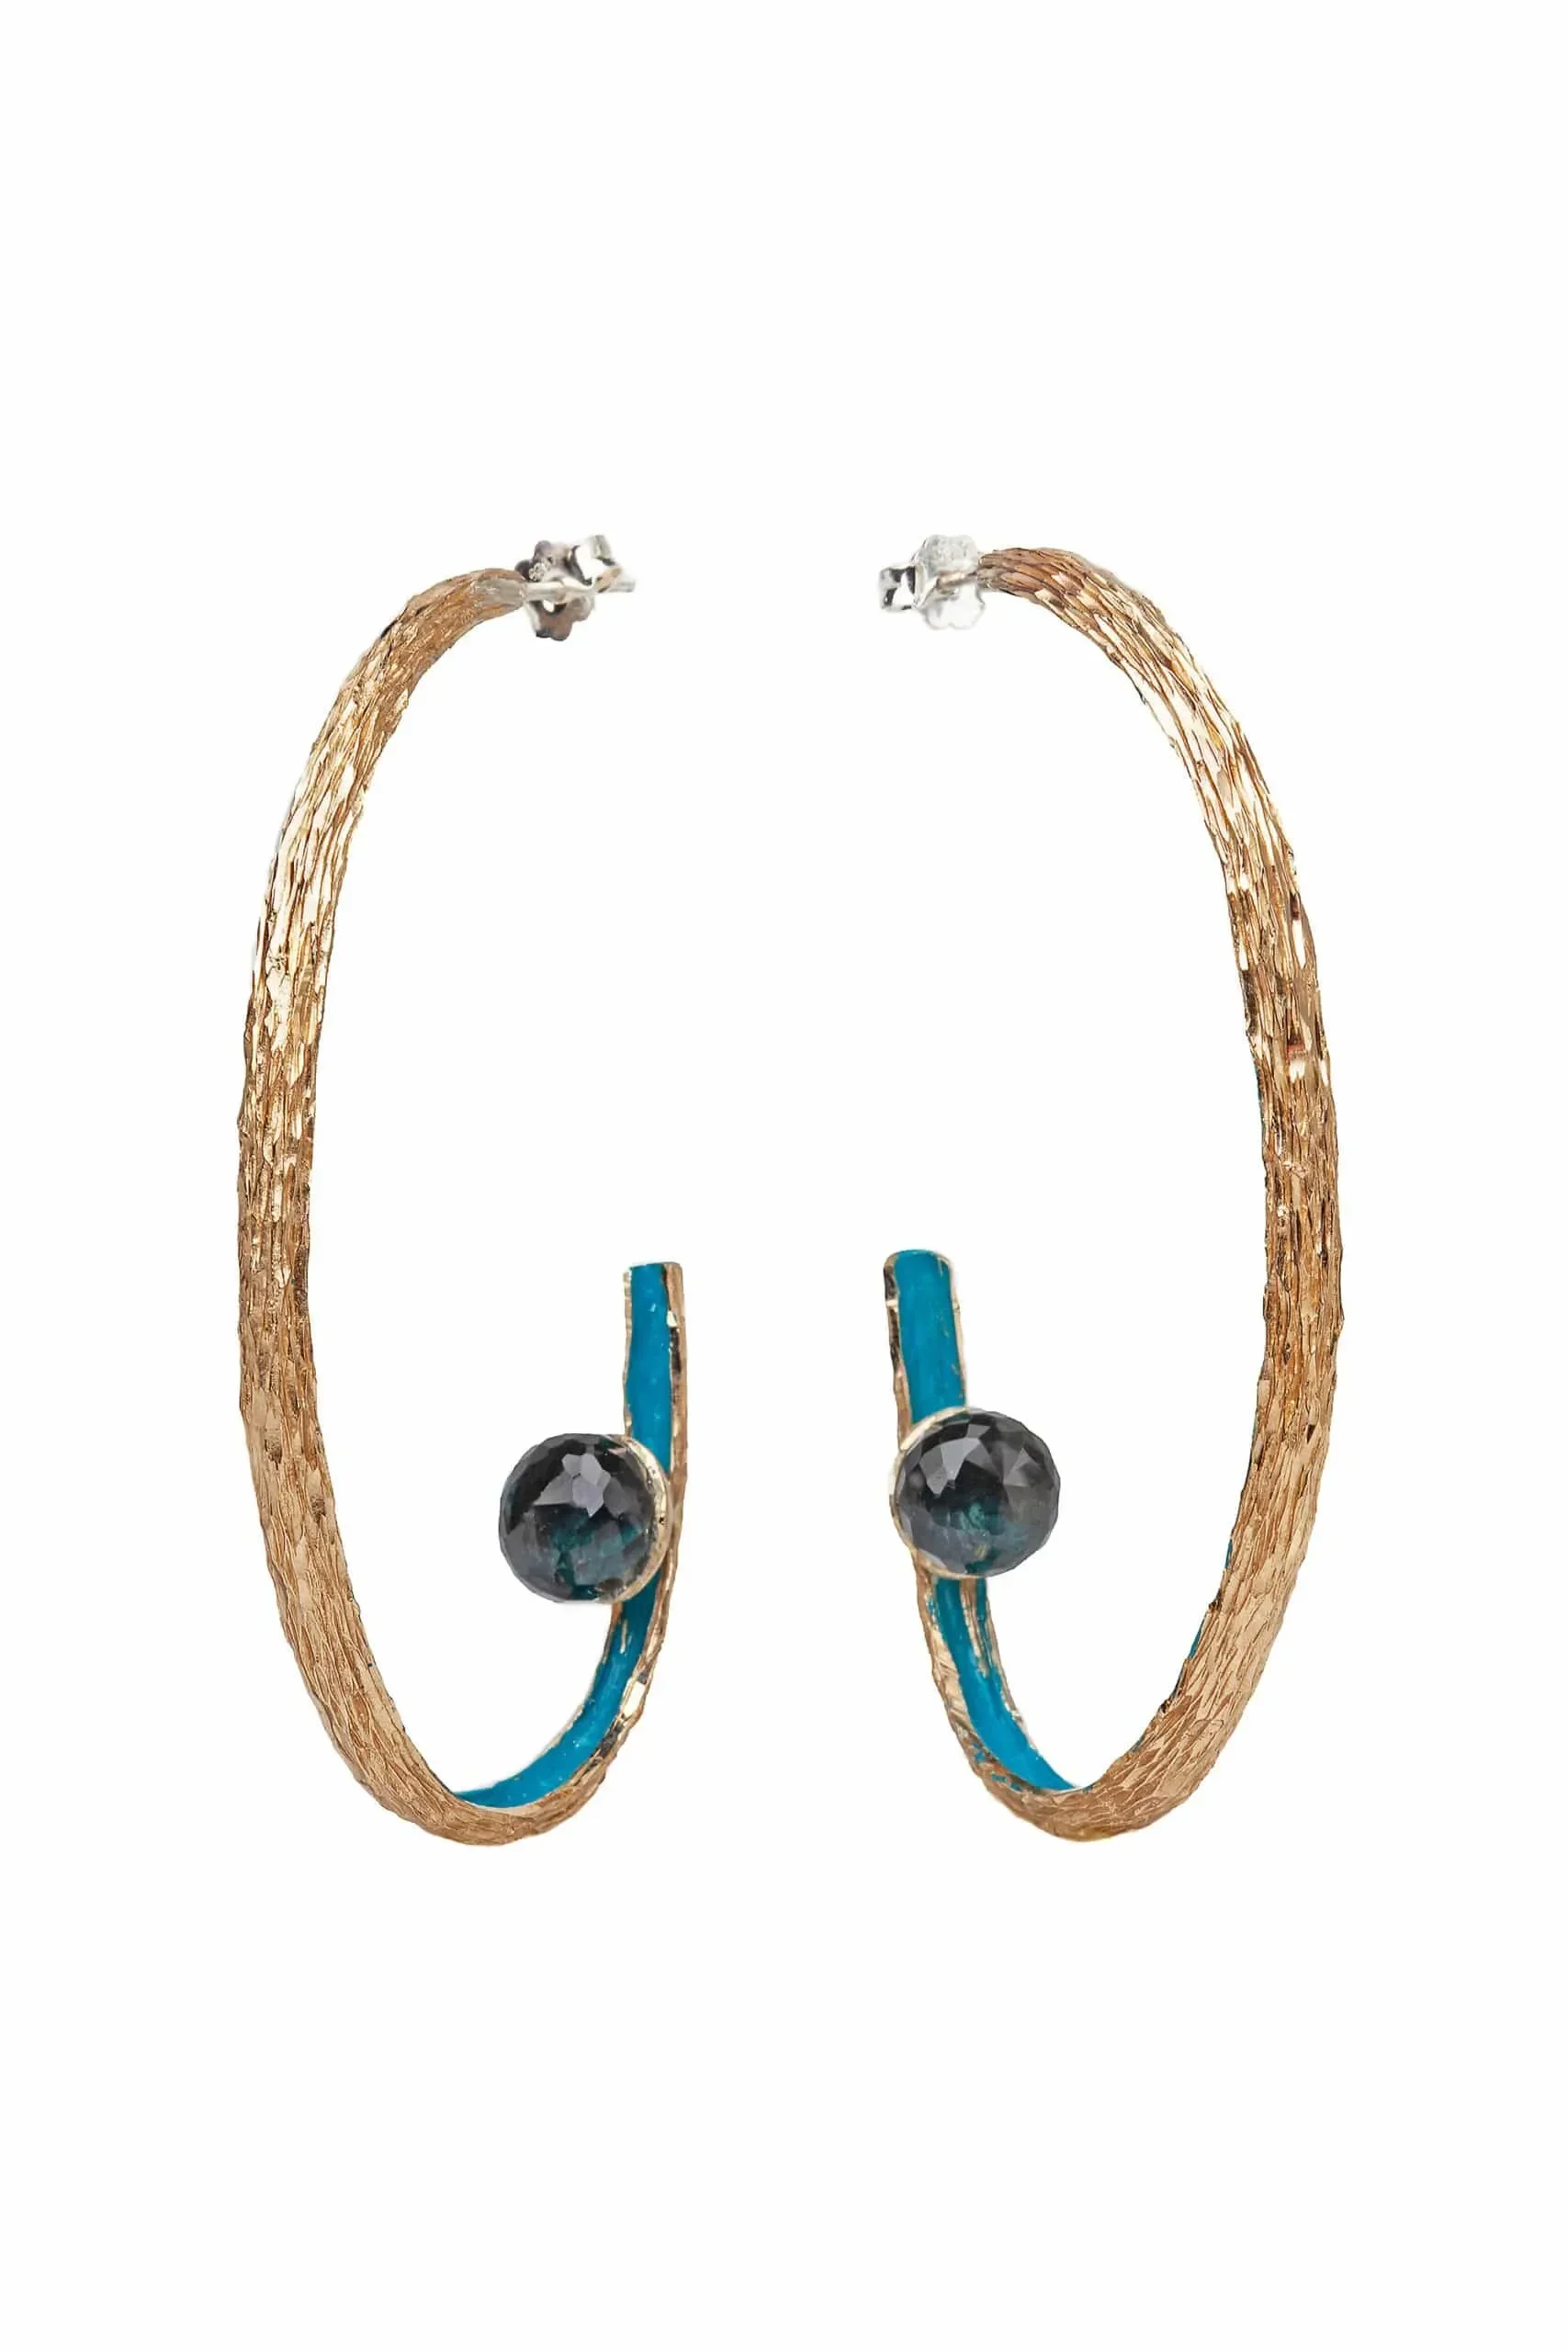 Unique oval bronze hoops with turquoise patina